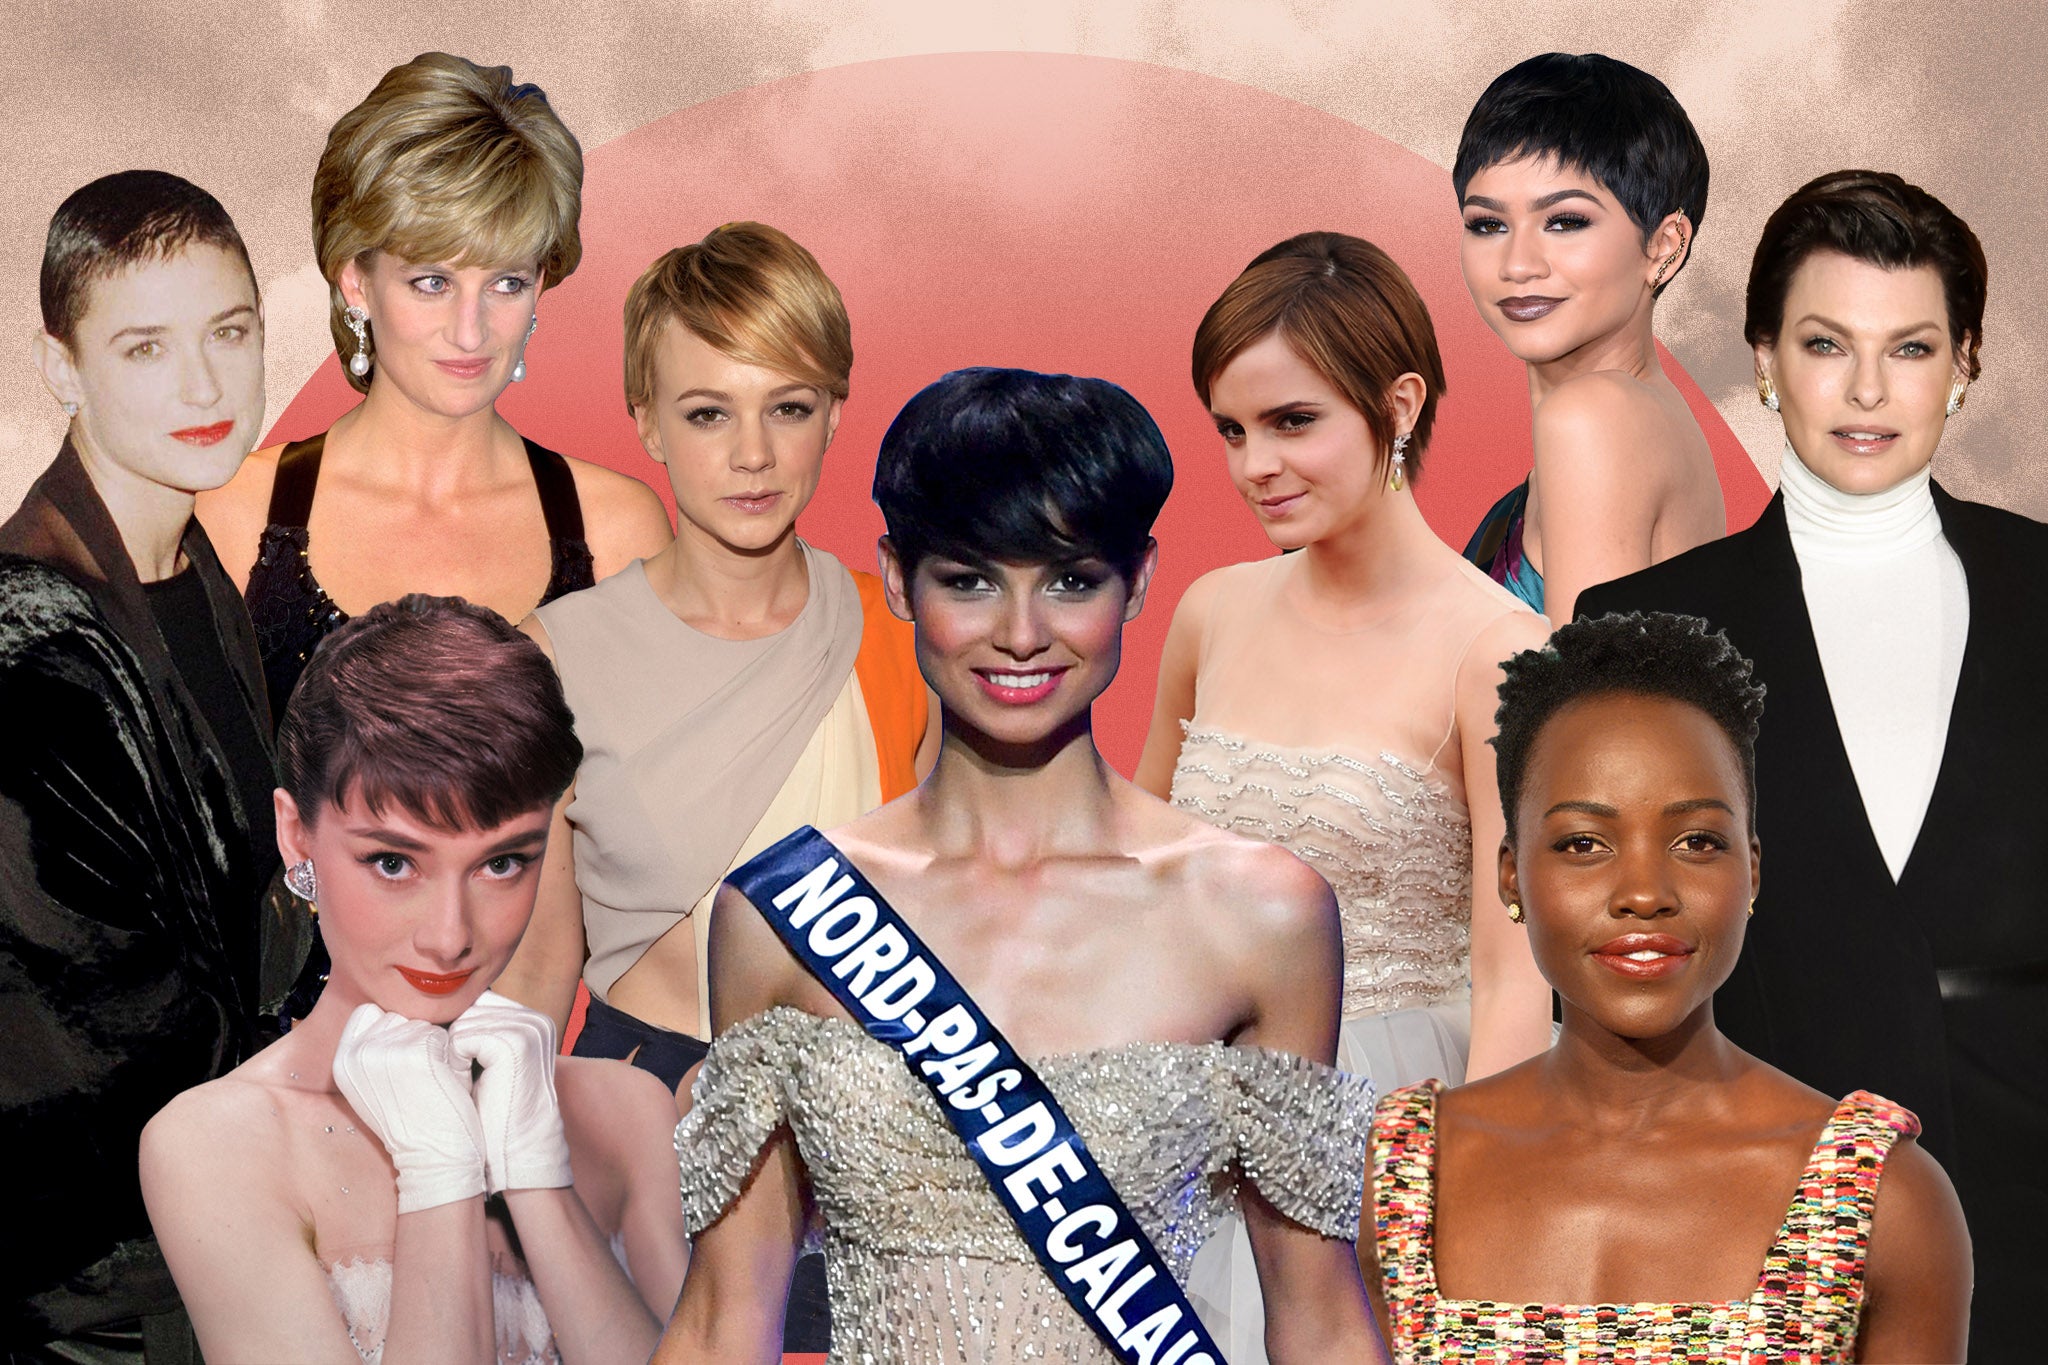 Some of the most beautiful women alive have had short hair – so why do we expect any different from the winner of Miss France